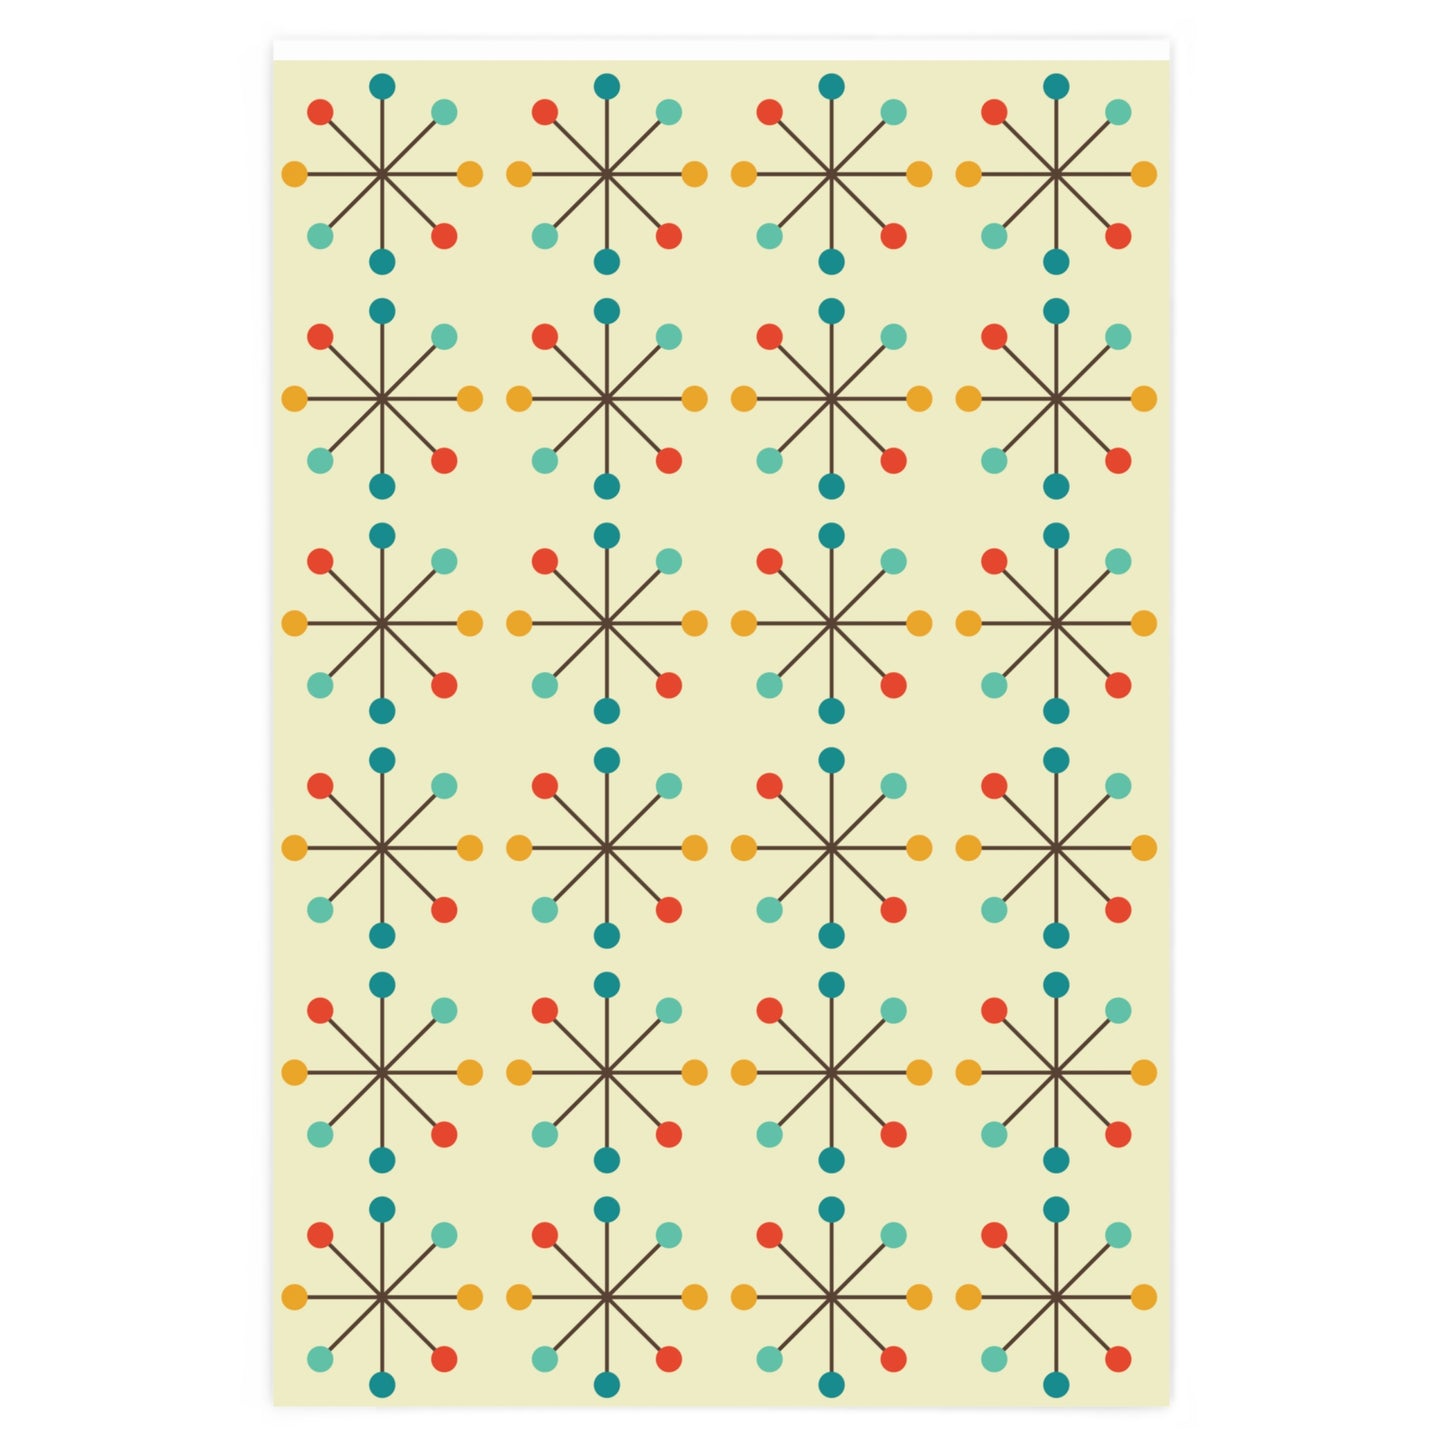 Retro 50s Atomic Starburst Colorful MCM Gift Wrapping Paper